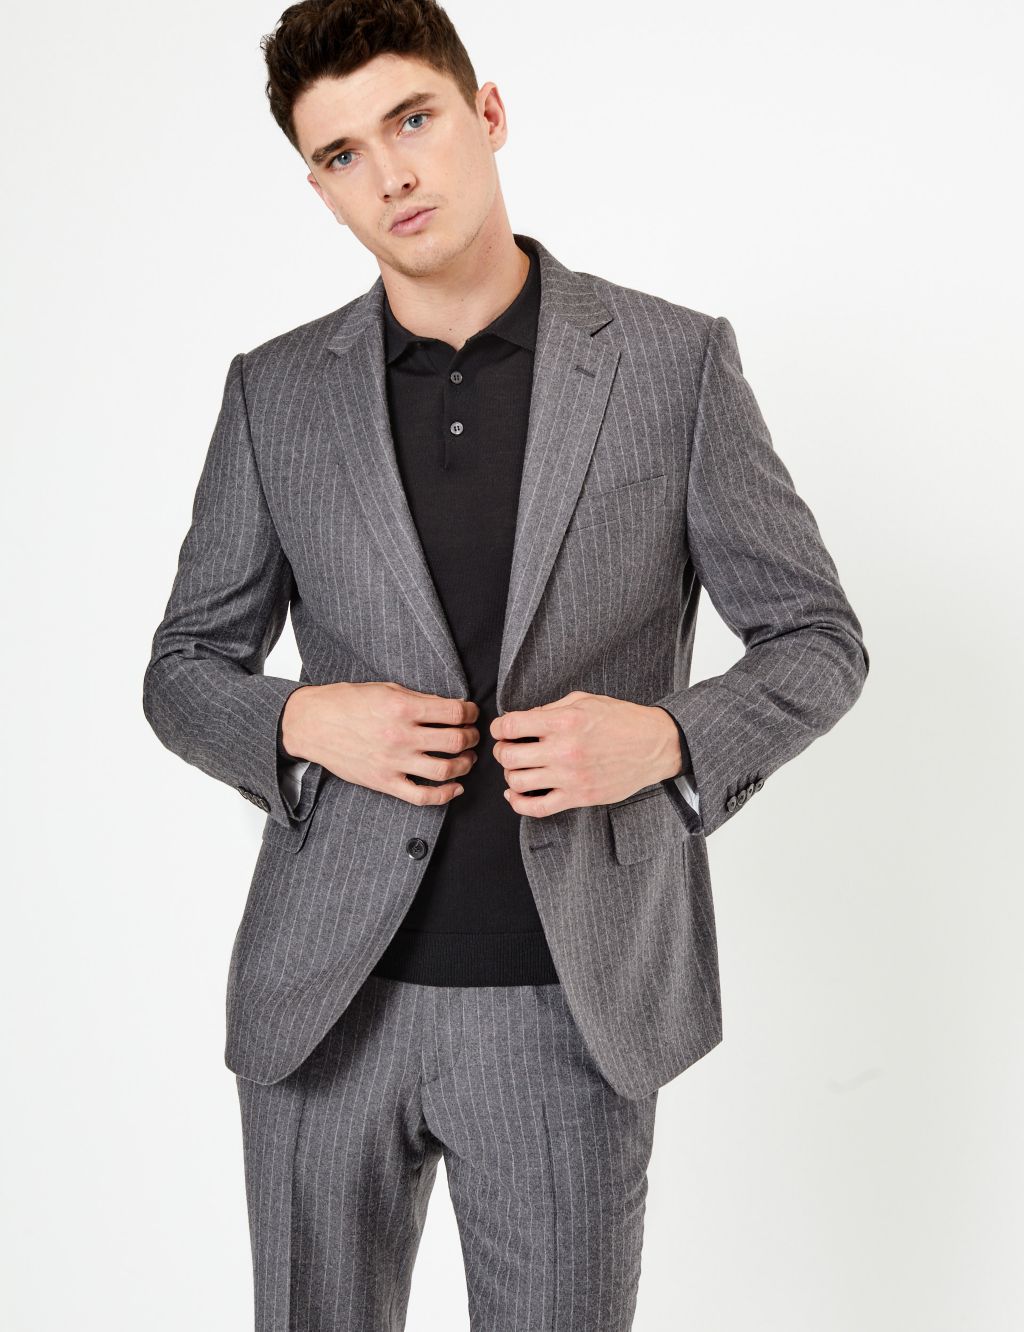 Charcoal Striped Tailored Fit Wool Jacket | Savile Row Inspired | M&S